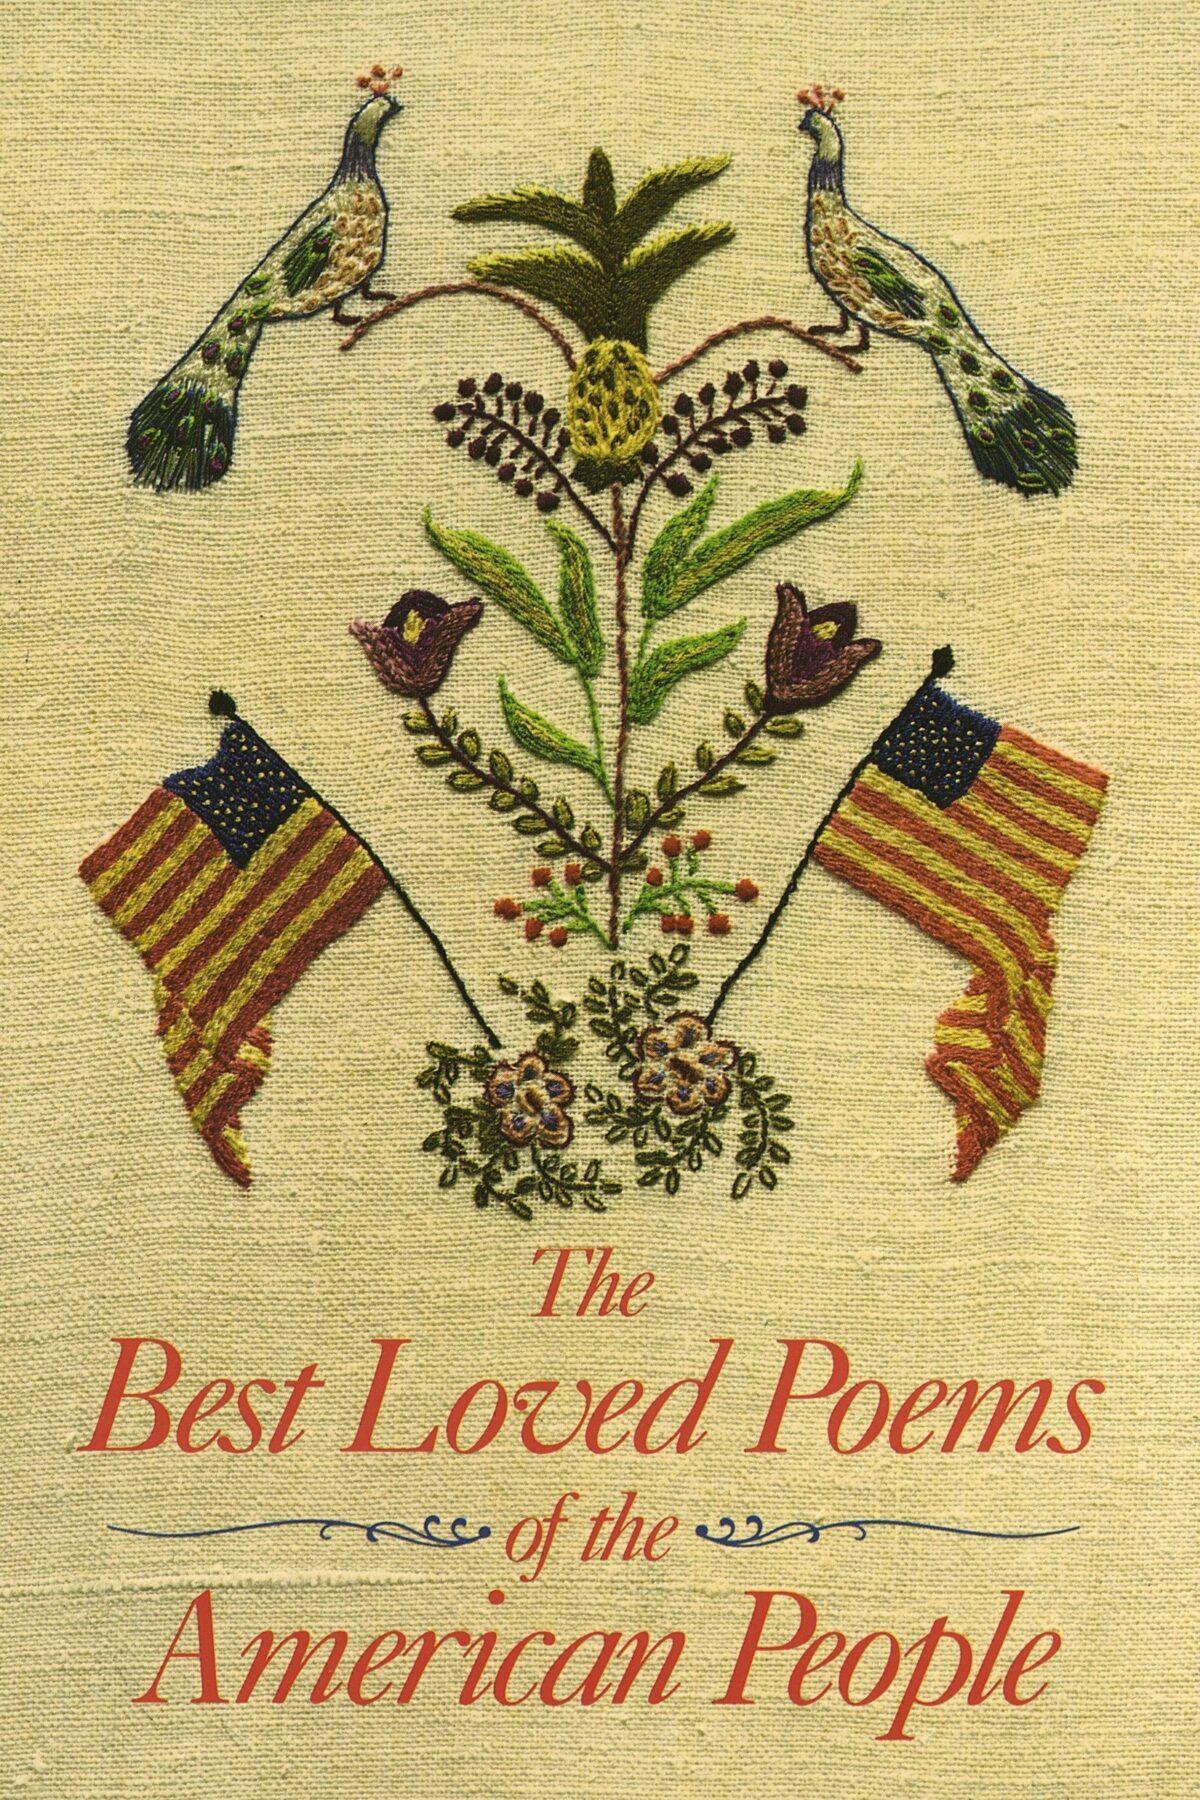 Peacocks and flags adorn the cover of a book of American poetry.